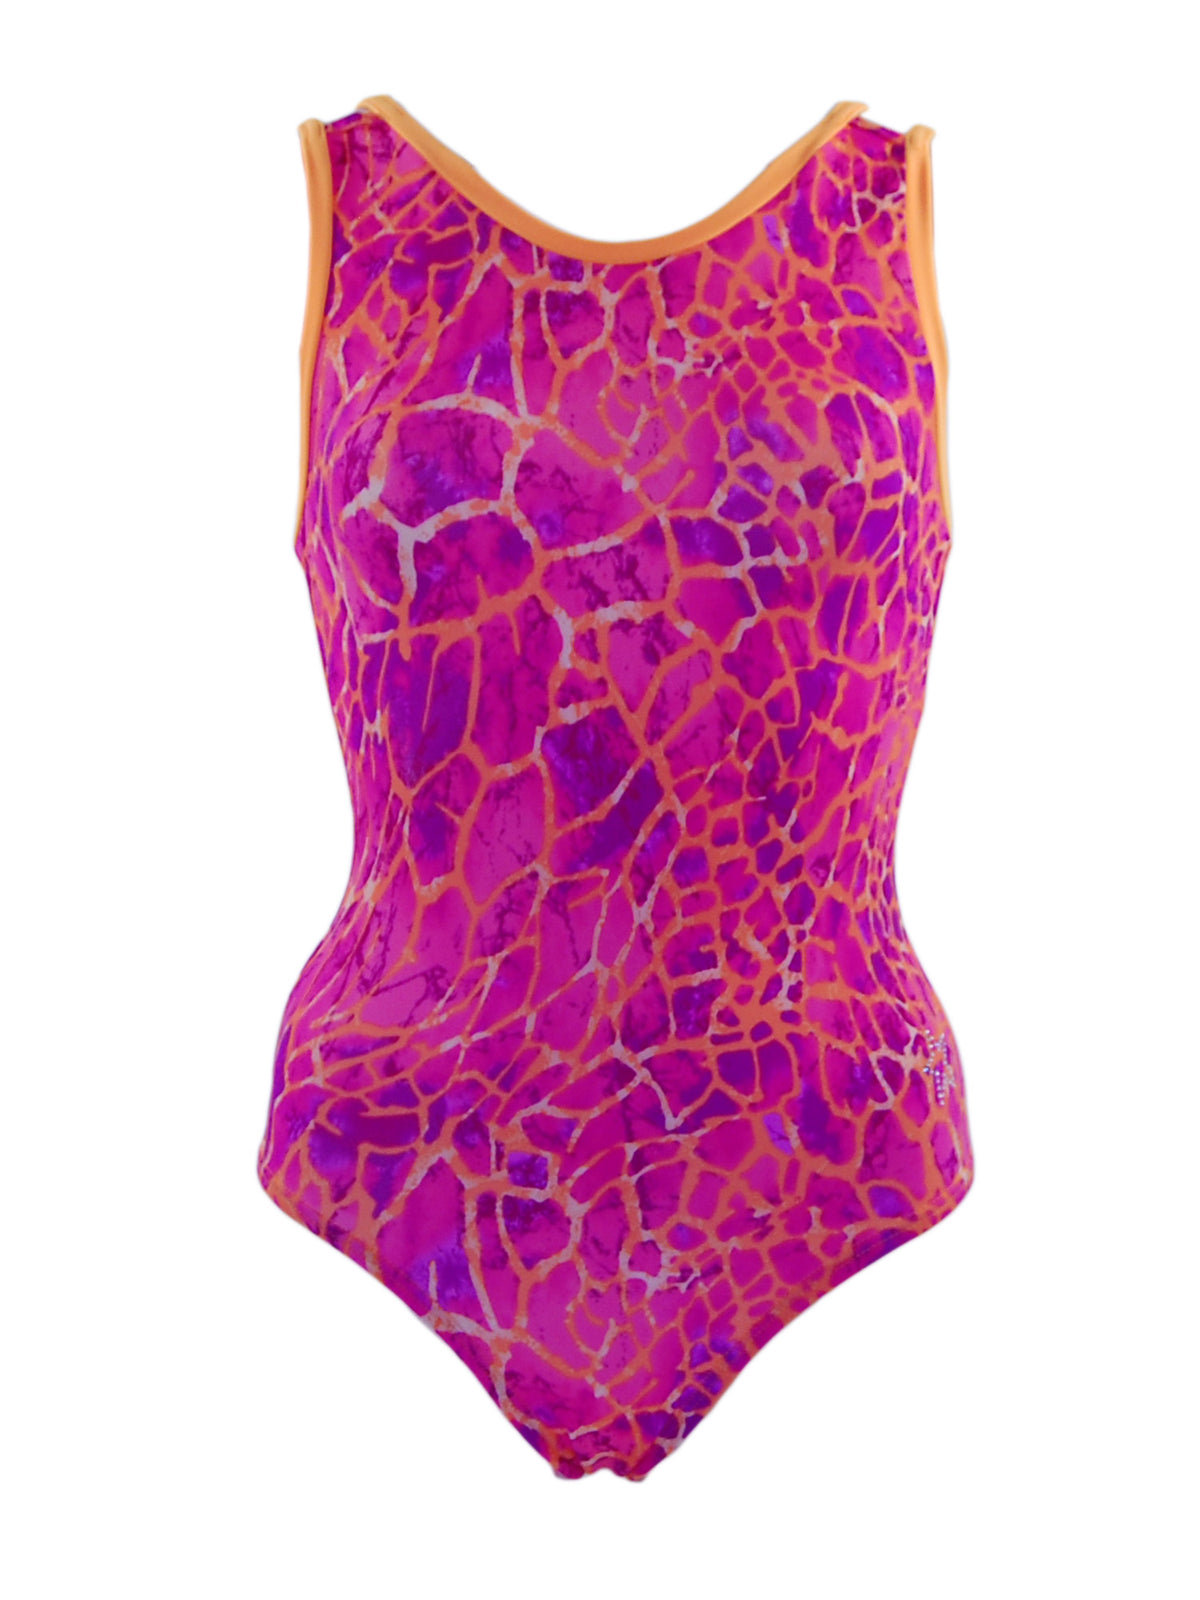 Front image of Double Strap style leotard